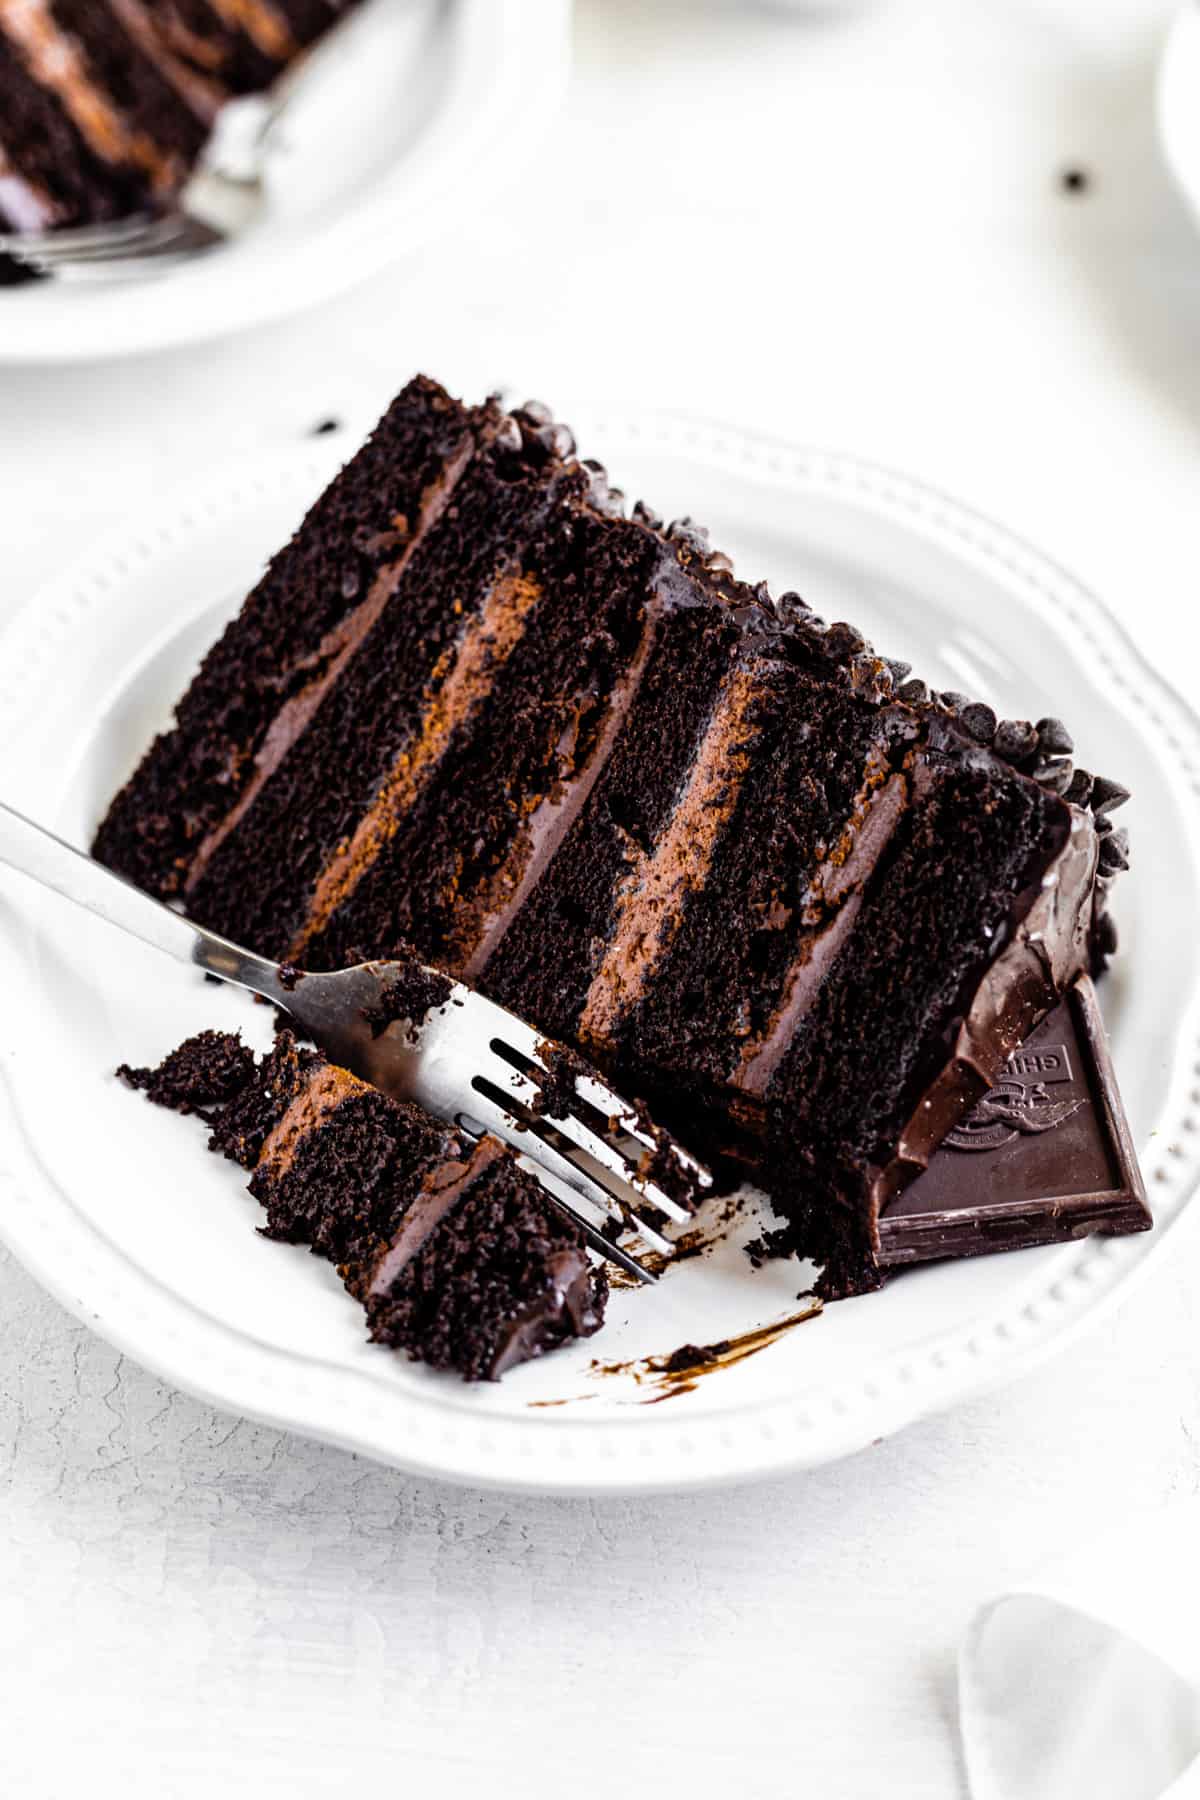 The Best Chocolate Cake {New and Improved} - Mel's Kitchen Cafe